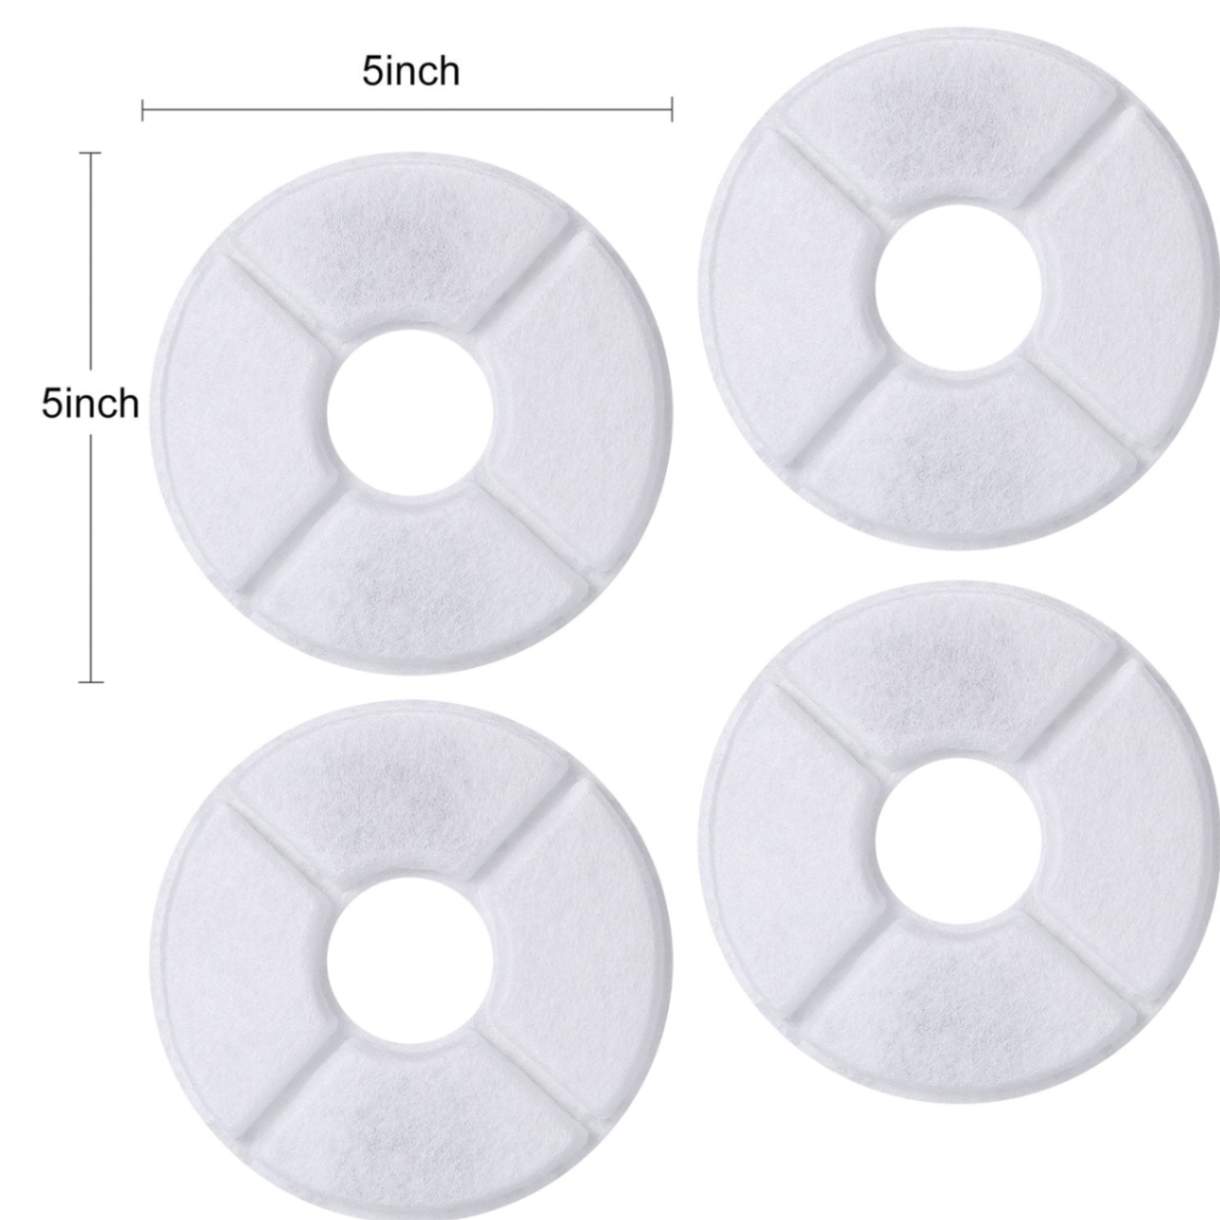 Cat Water Fountain Replacement Filters - Pack of 4